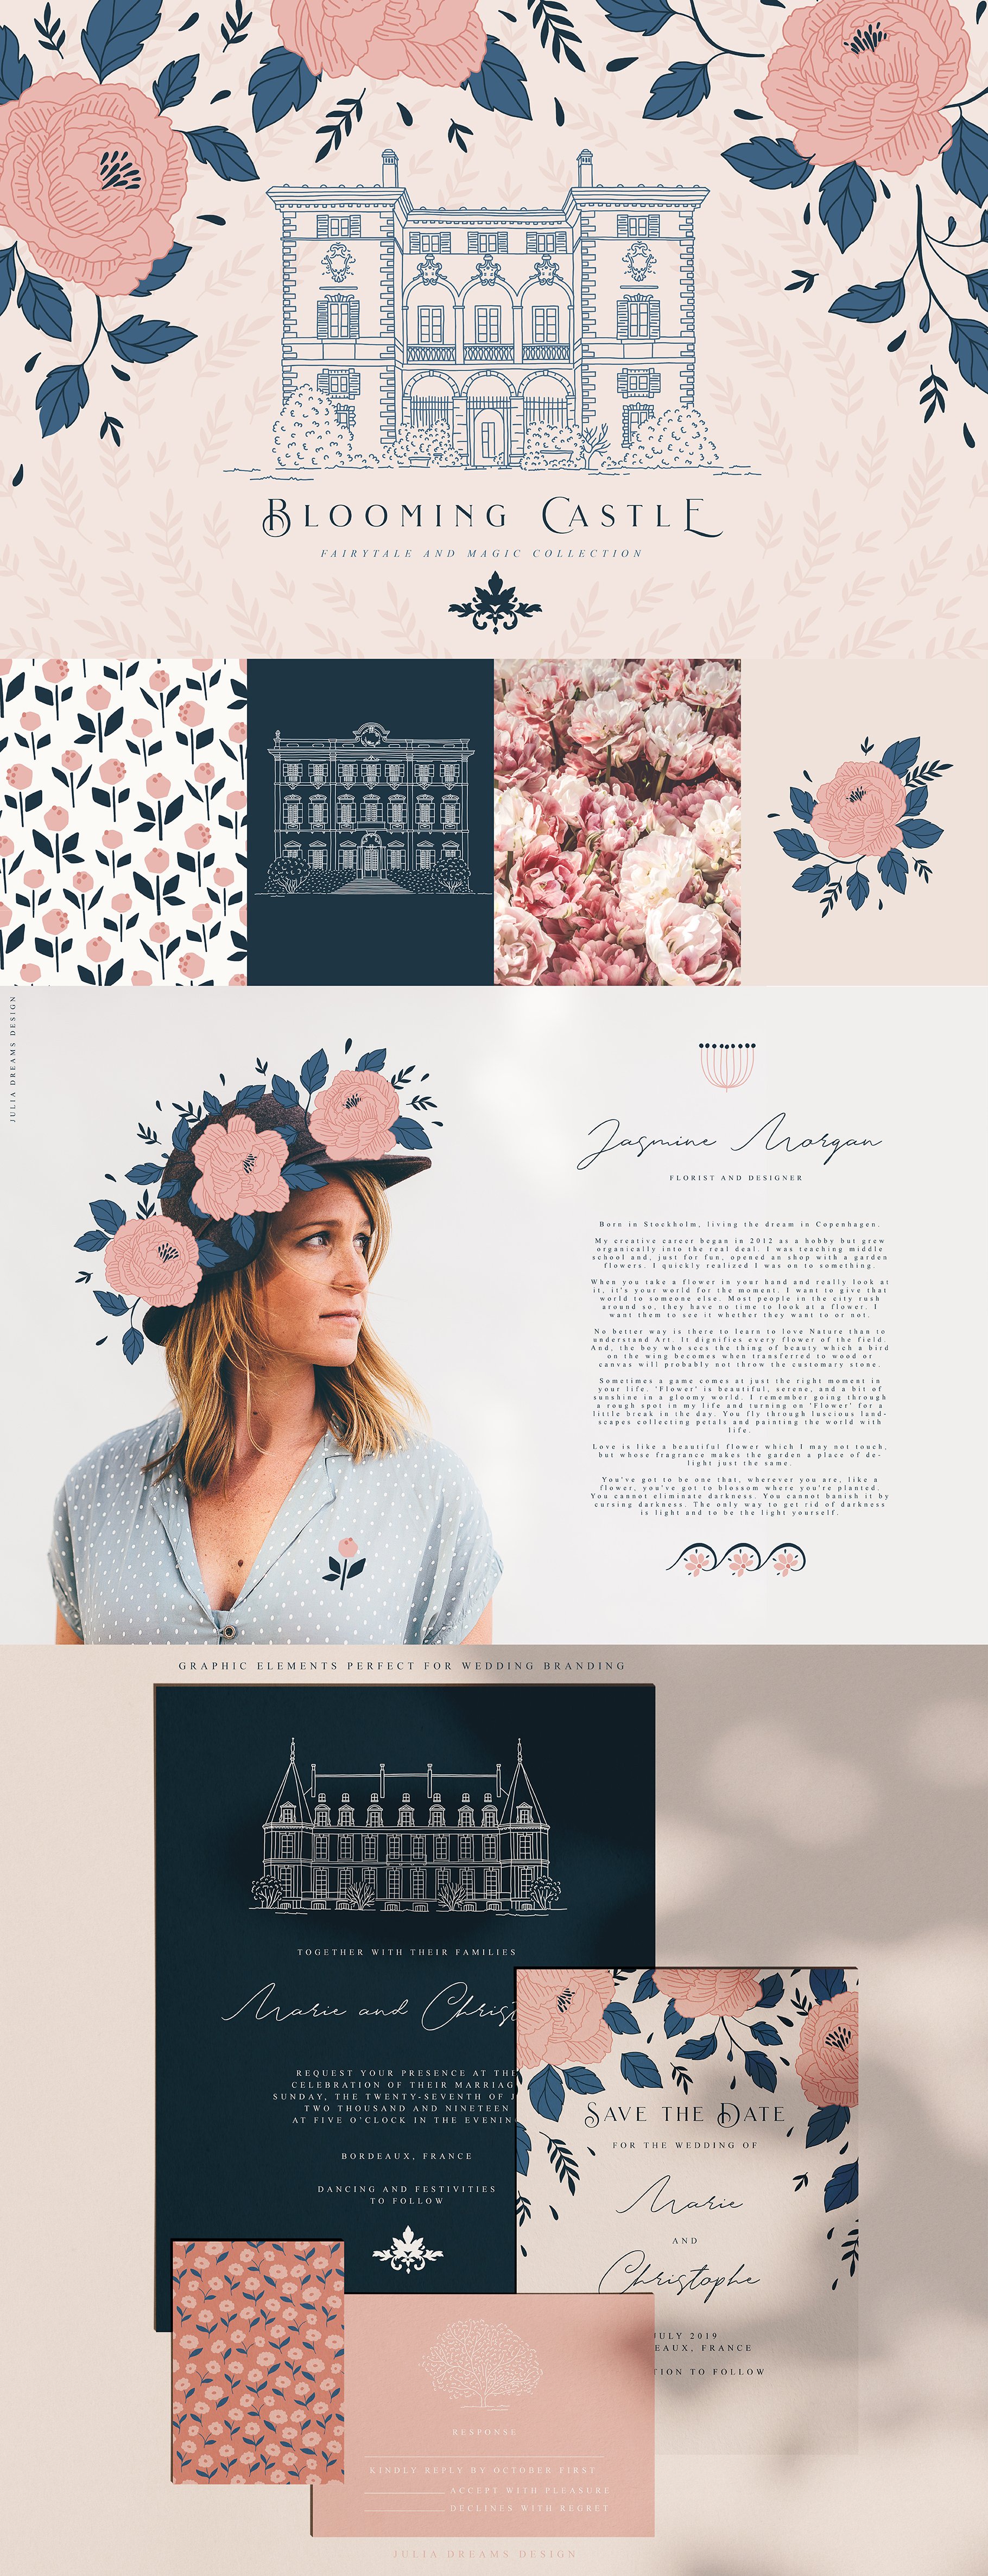 Delicate template with flowers and pastel colors.